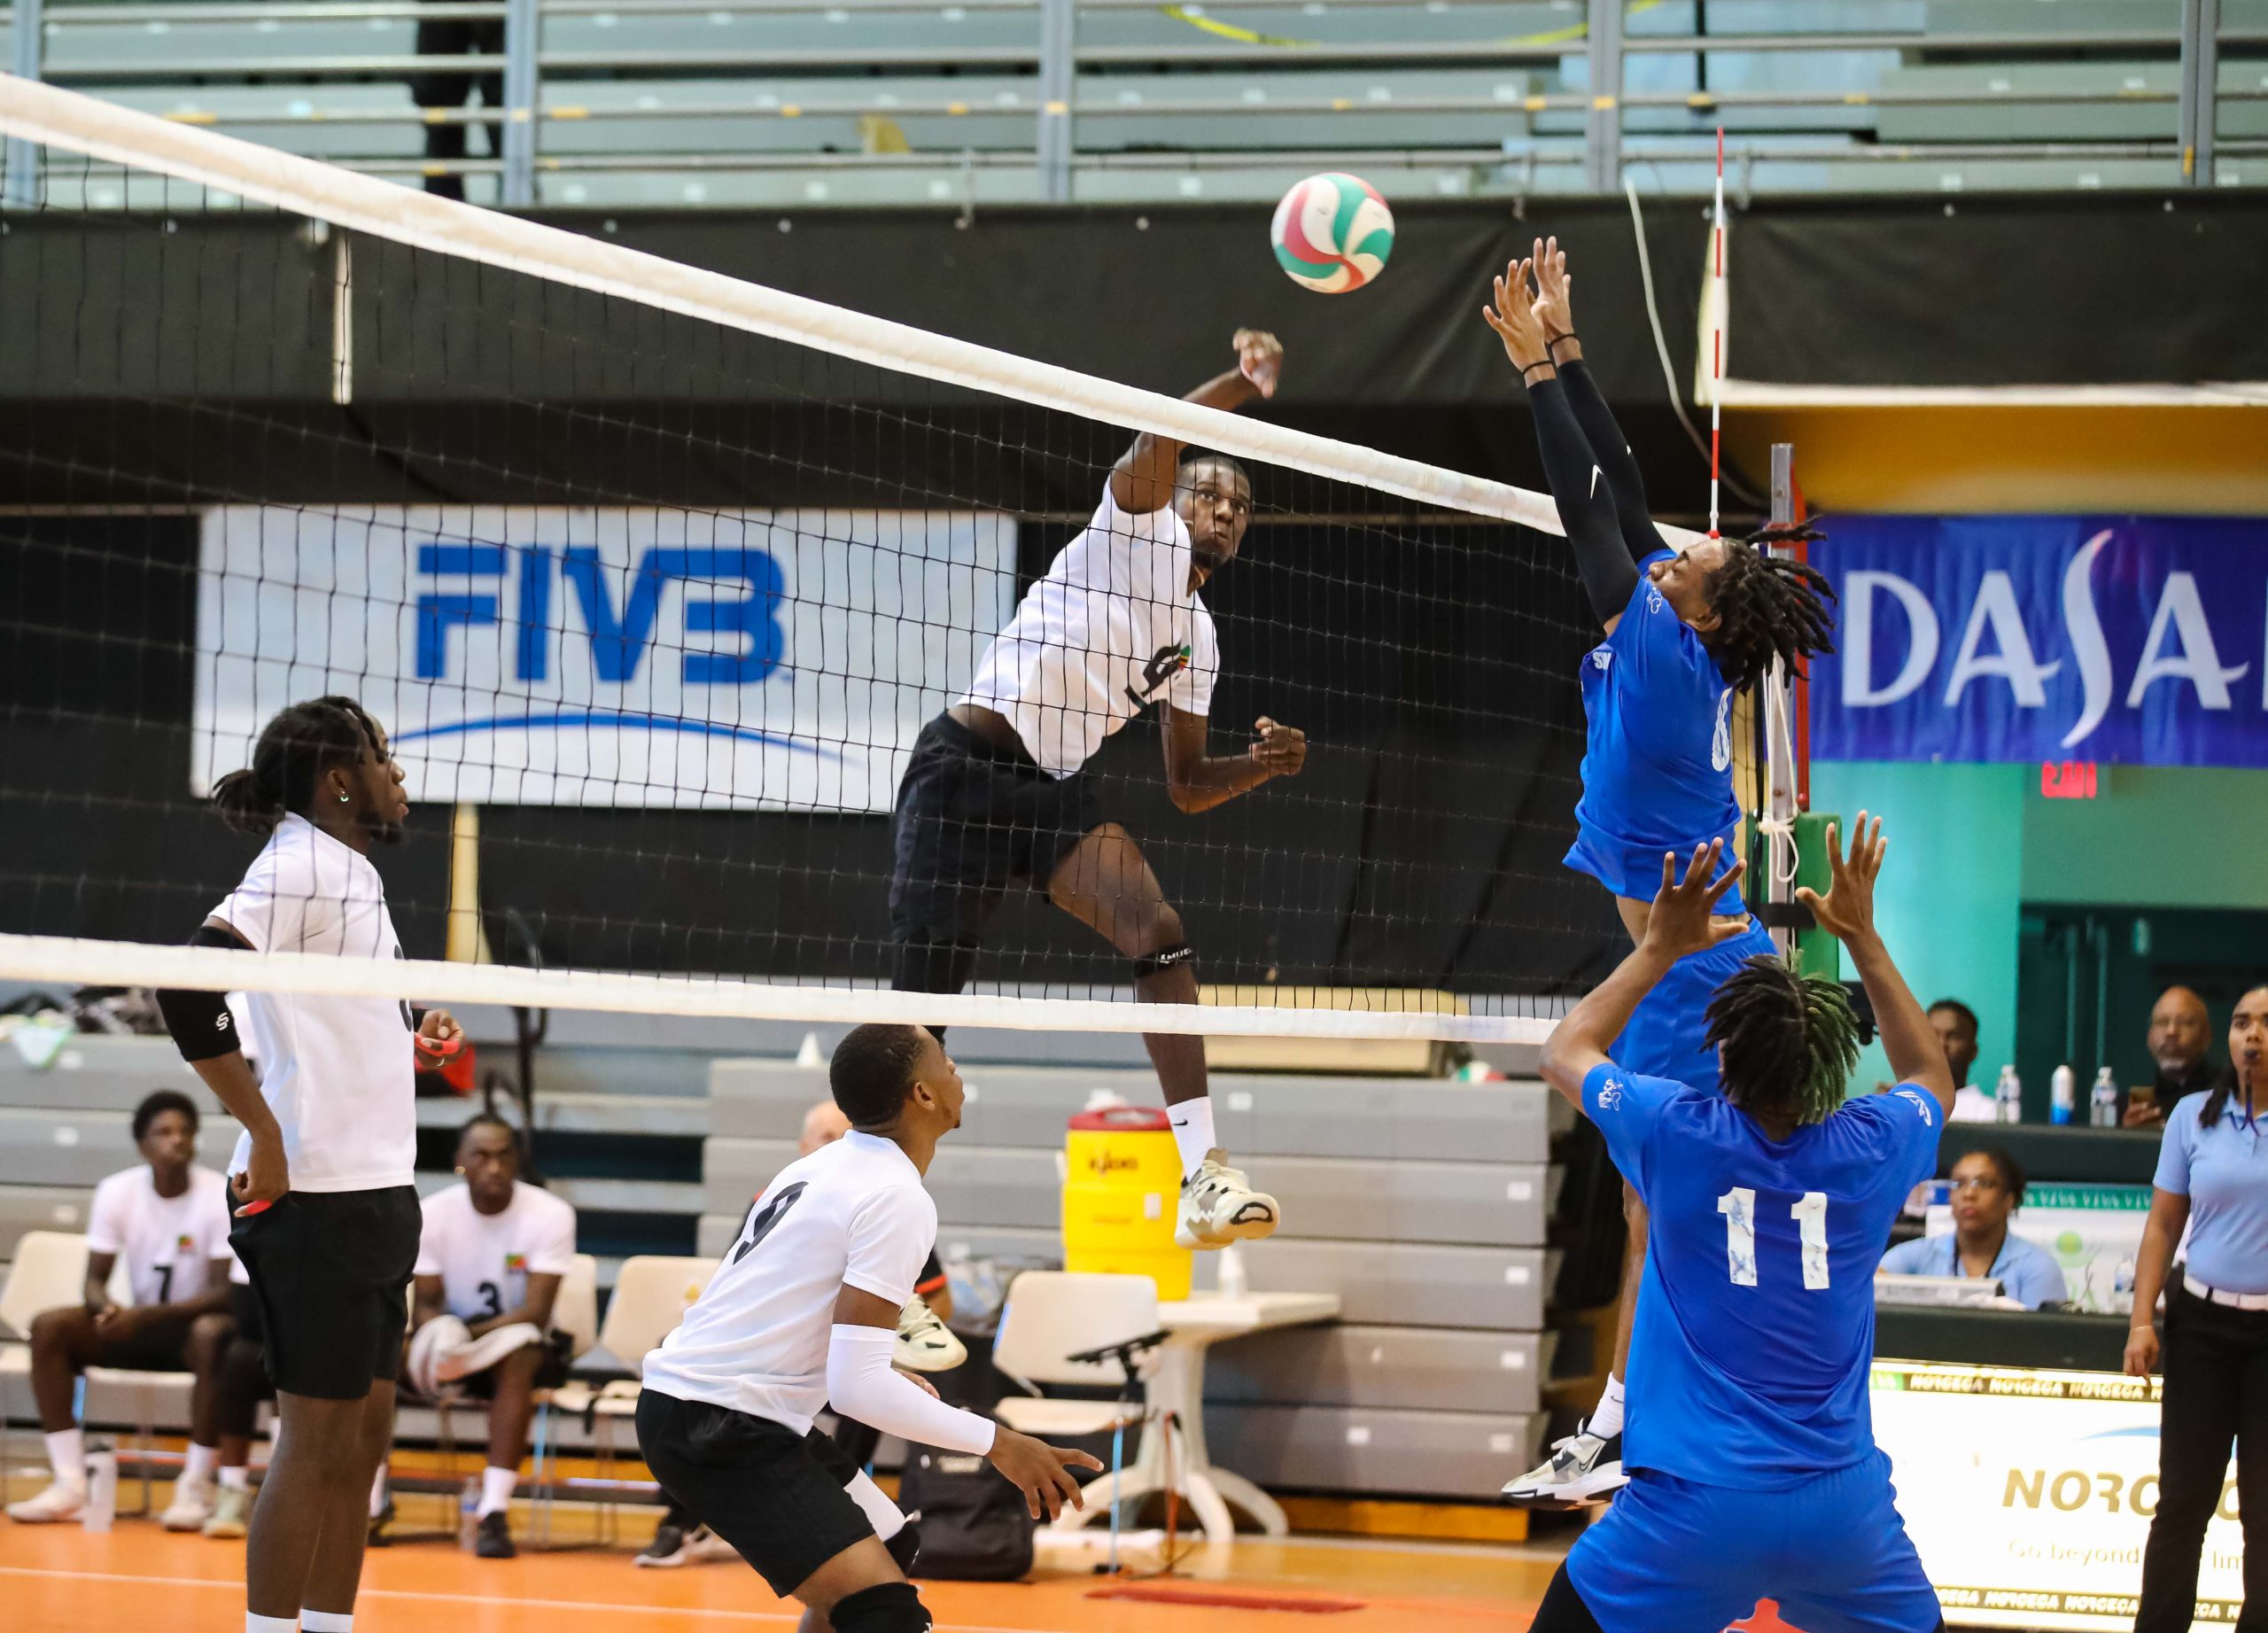 St. Kitts and Nevis into ECVA U23 final after defeating St. Maarten